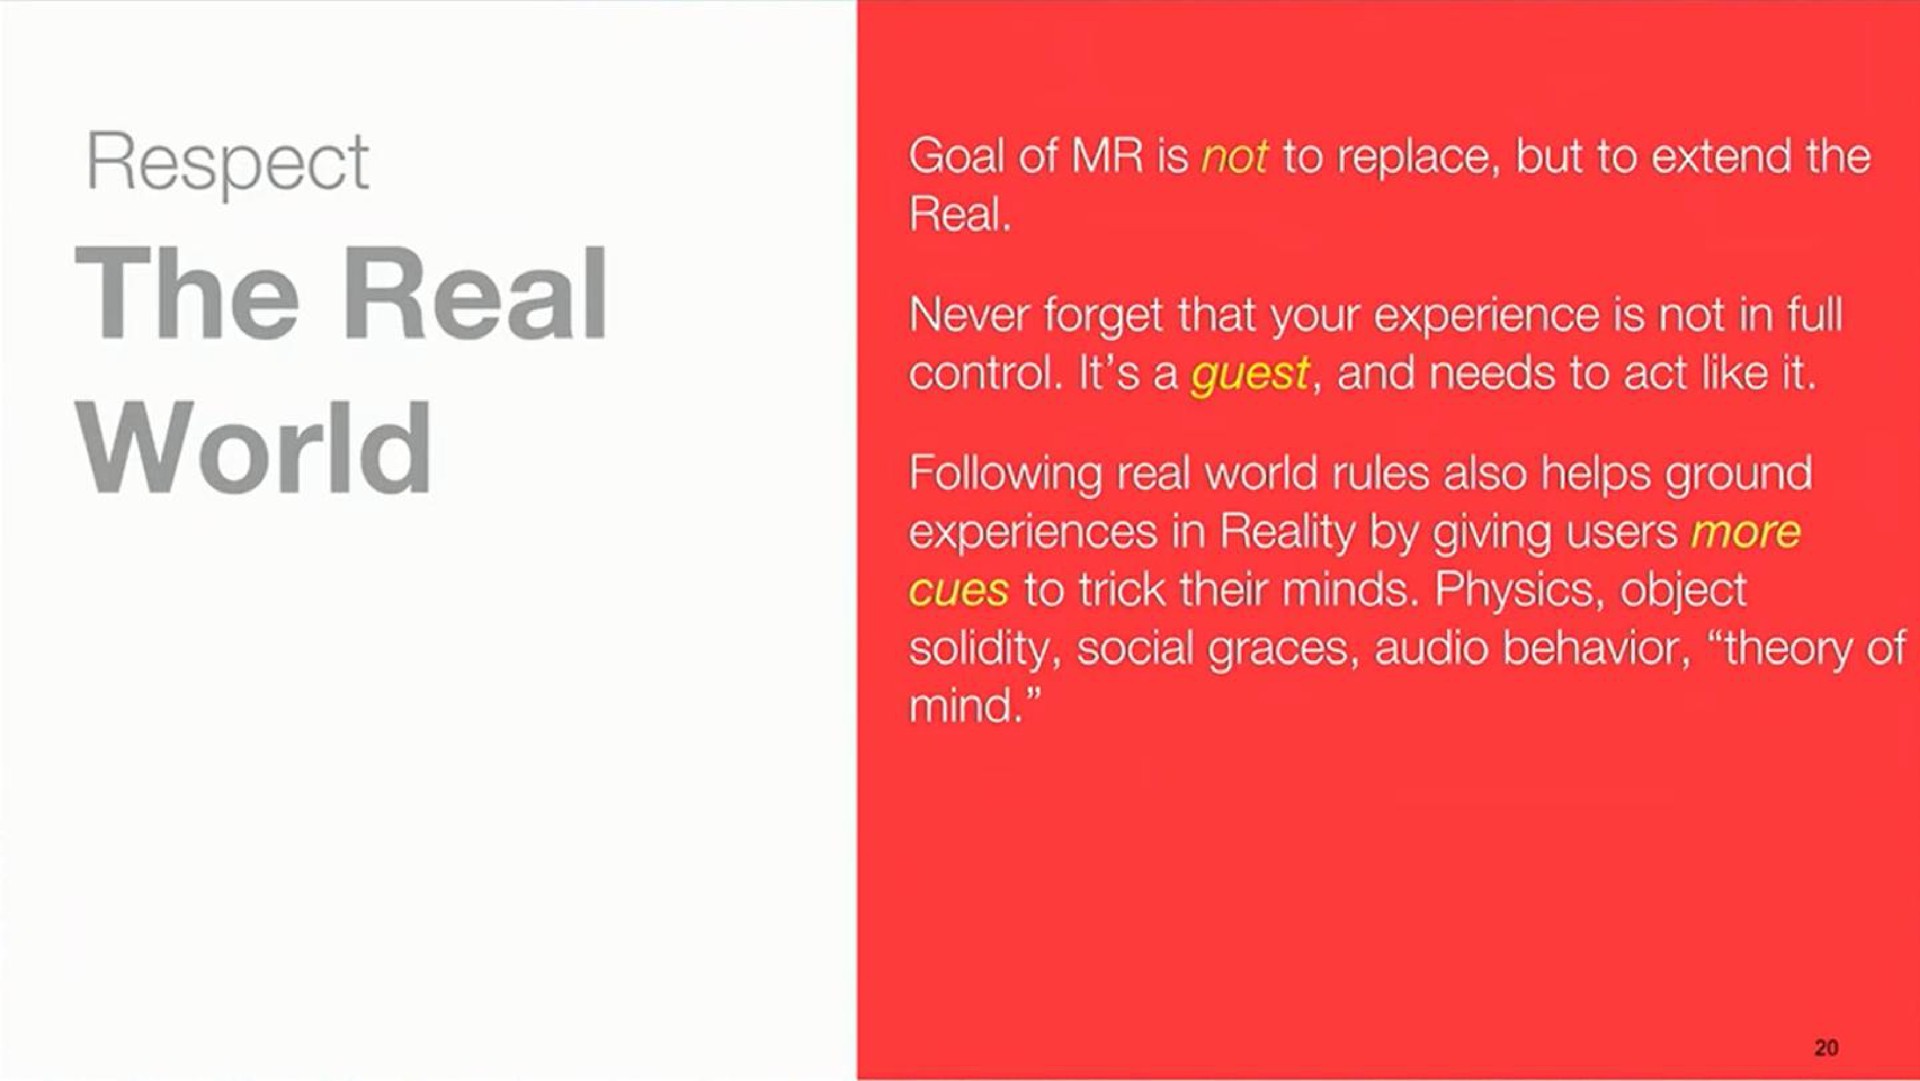 respect the real world goal of is not to replace but to extend the real never forget that your experience is not in full control it a guest and needs to act like it following real world rules also helps ground experiences in reality by giving users more cues to trick their minds physics object solidity social graces audio behavior theory of mind | Magic Leap